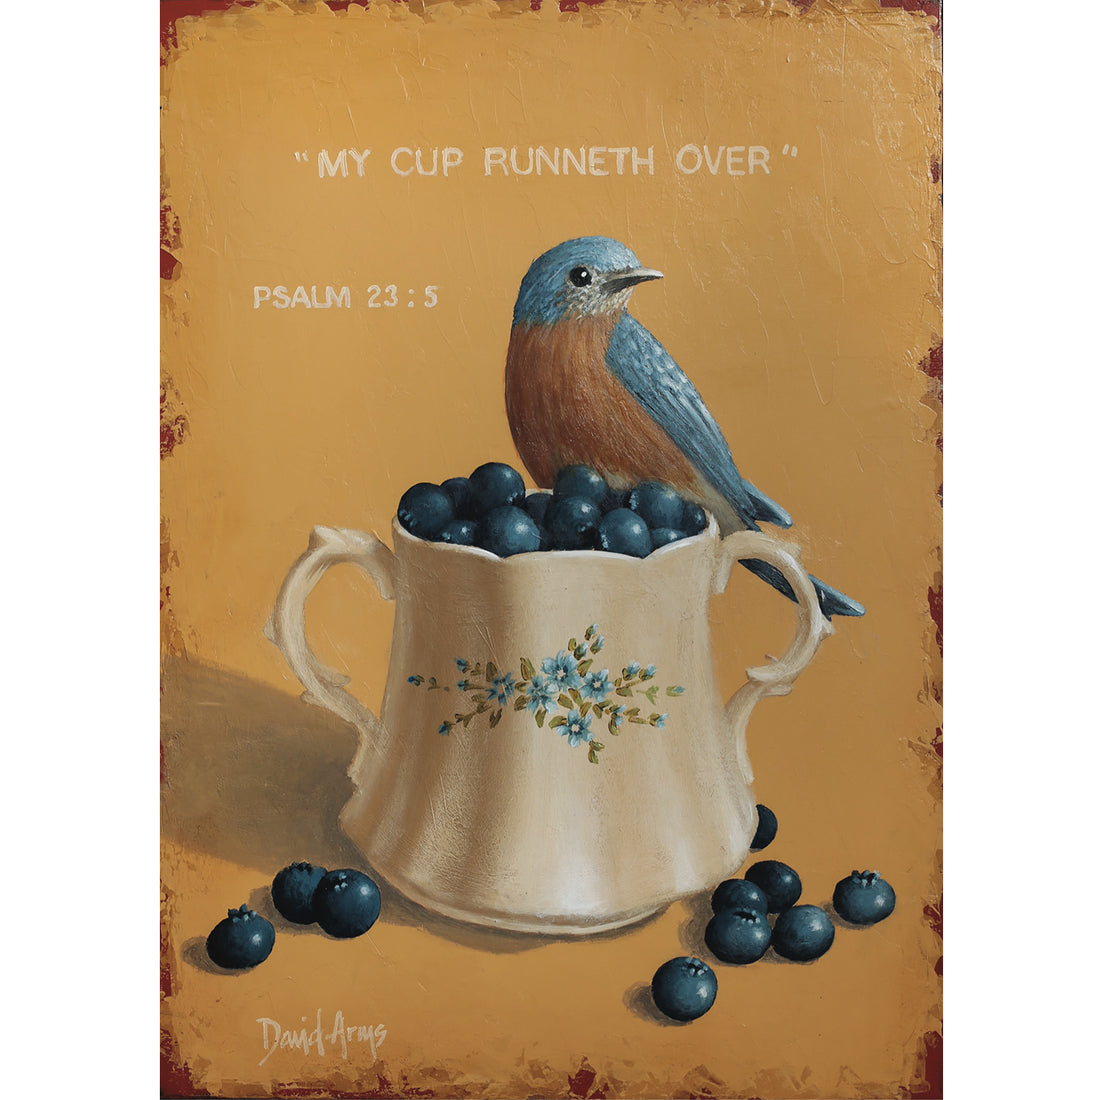 An illustration of a blue bird resting on the edge of a floral tea cup overflowing with blueberries on a tan background, with Bible quote &quot;Psalm 23:5&quot; printed in white over the bird.